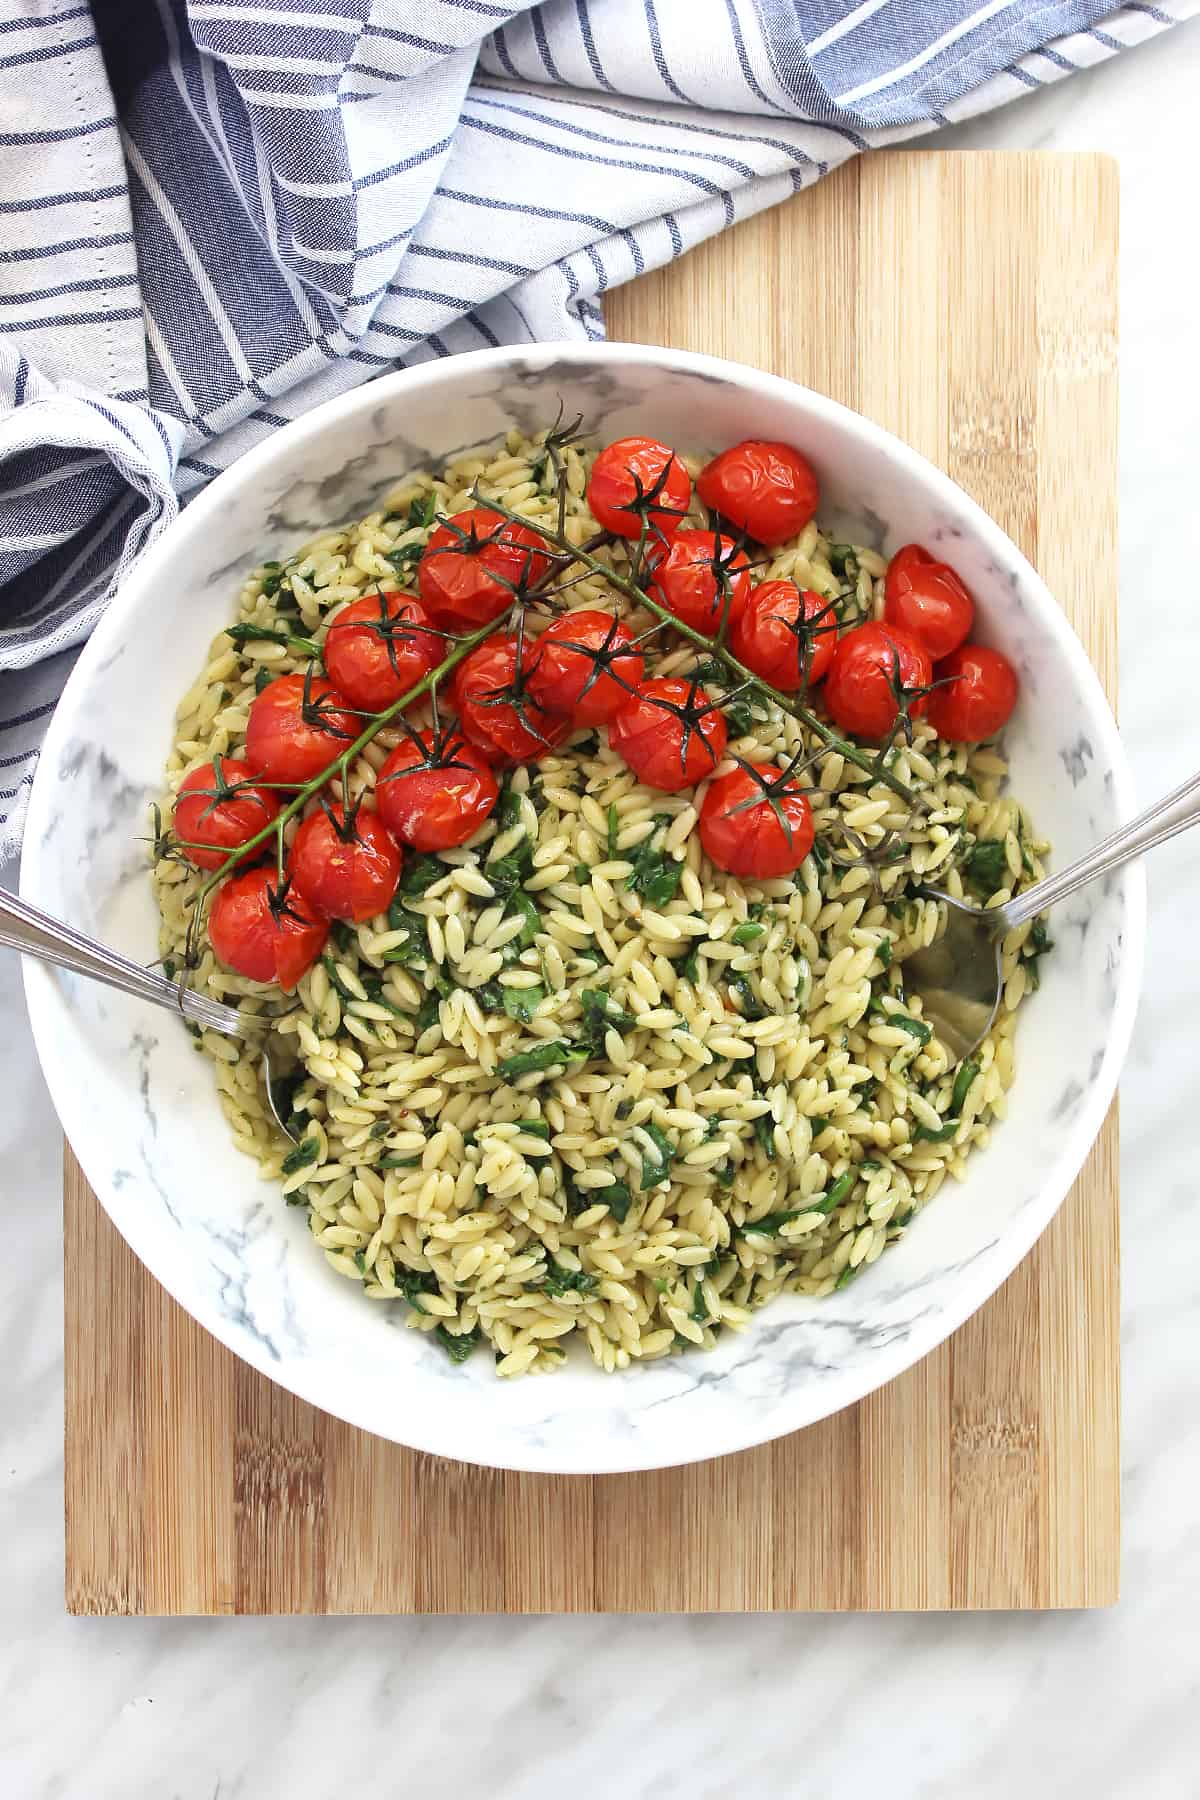 A bowl of orzo pasta salad on a chopping board